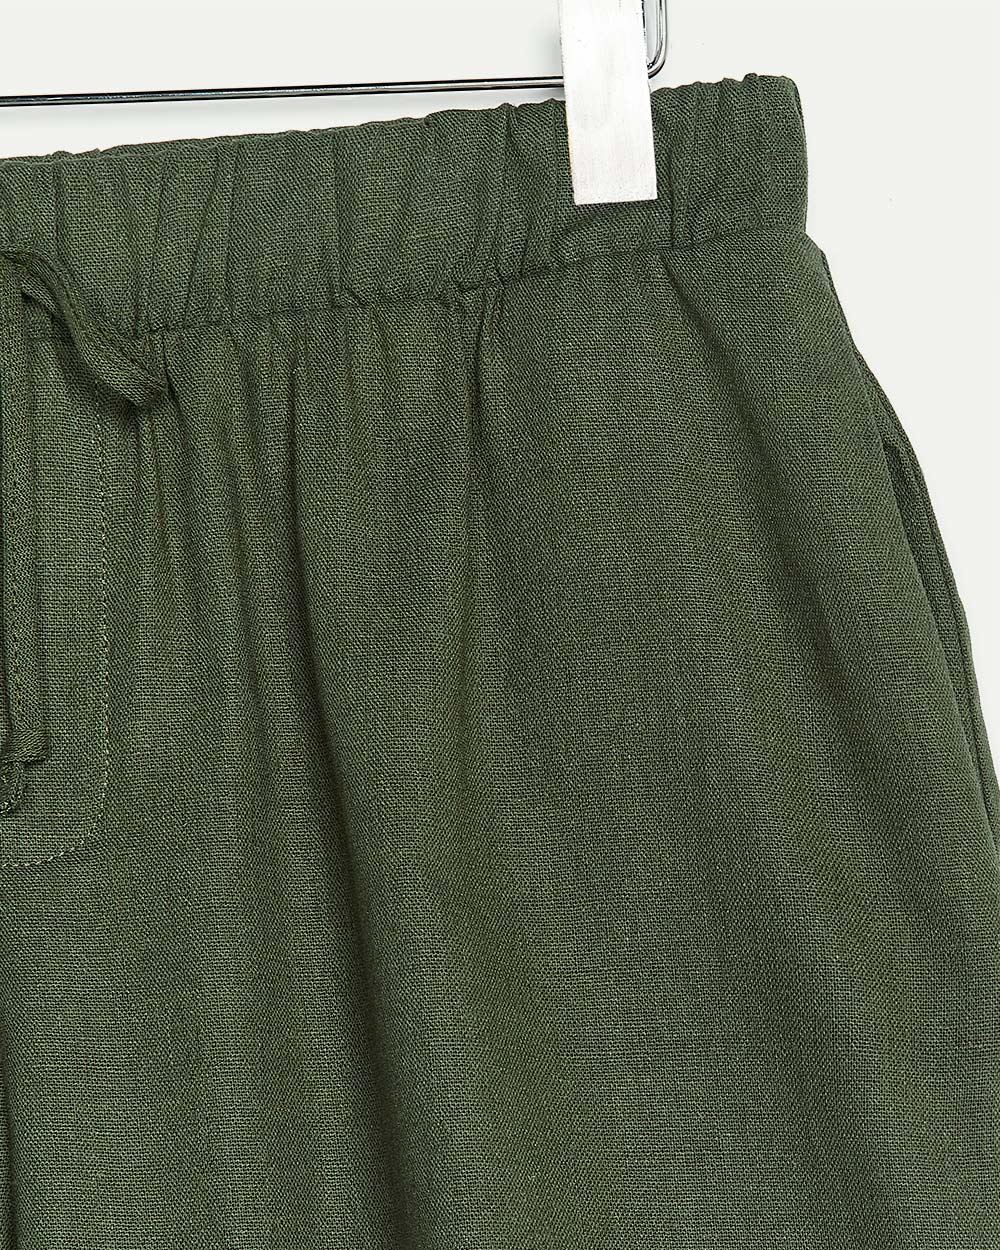 Solid Linen Shorts with Drawstring